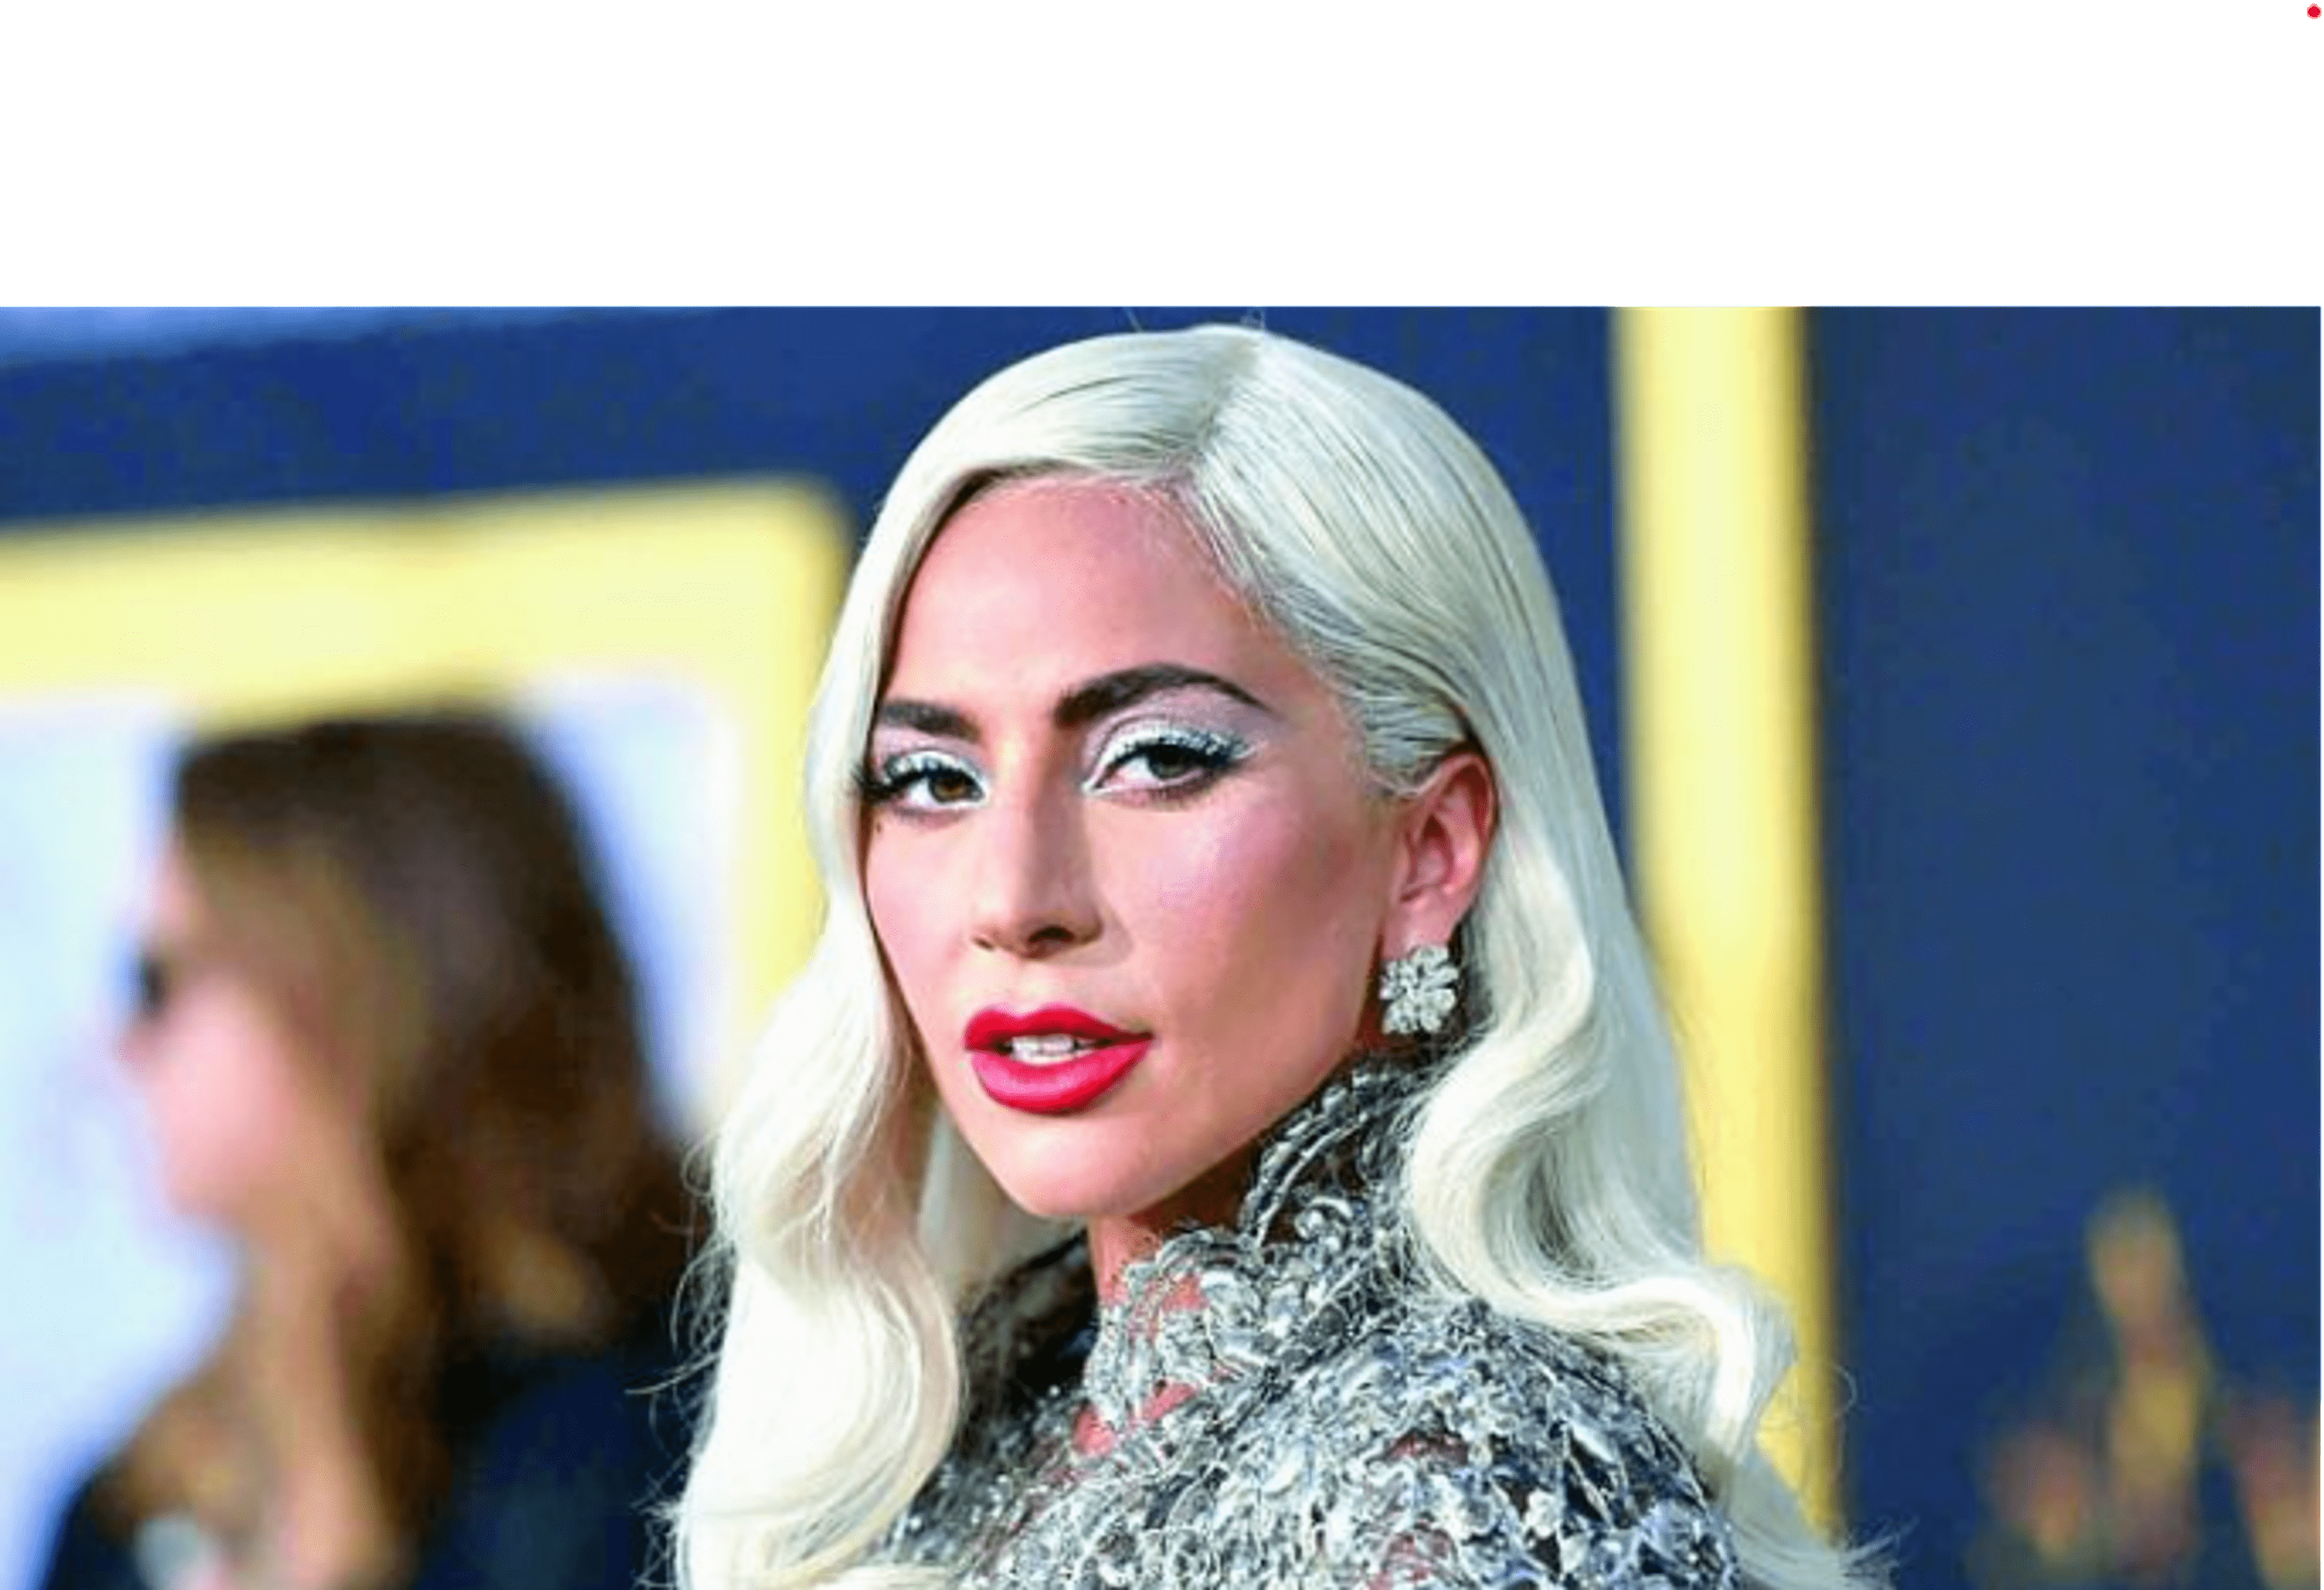 Lady Gaga spoke about the rejection of a bad habit